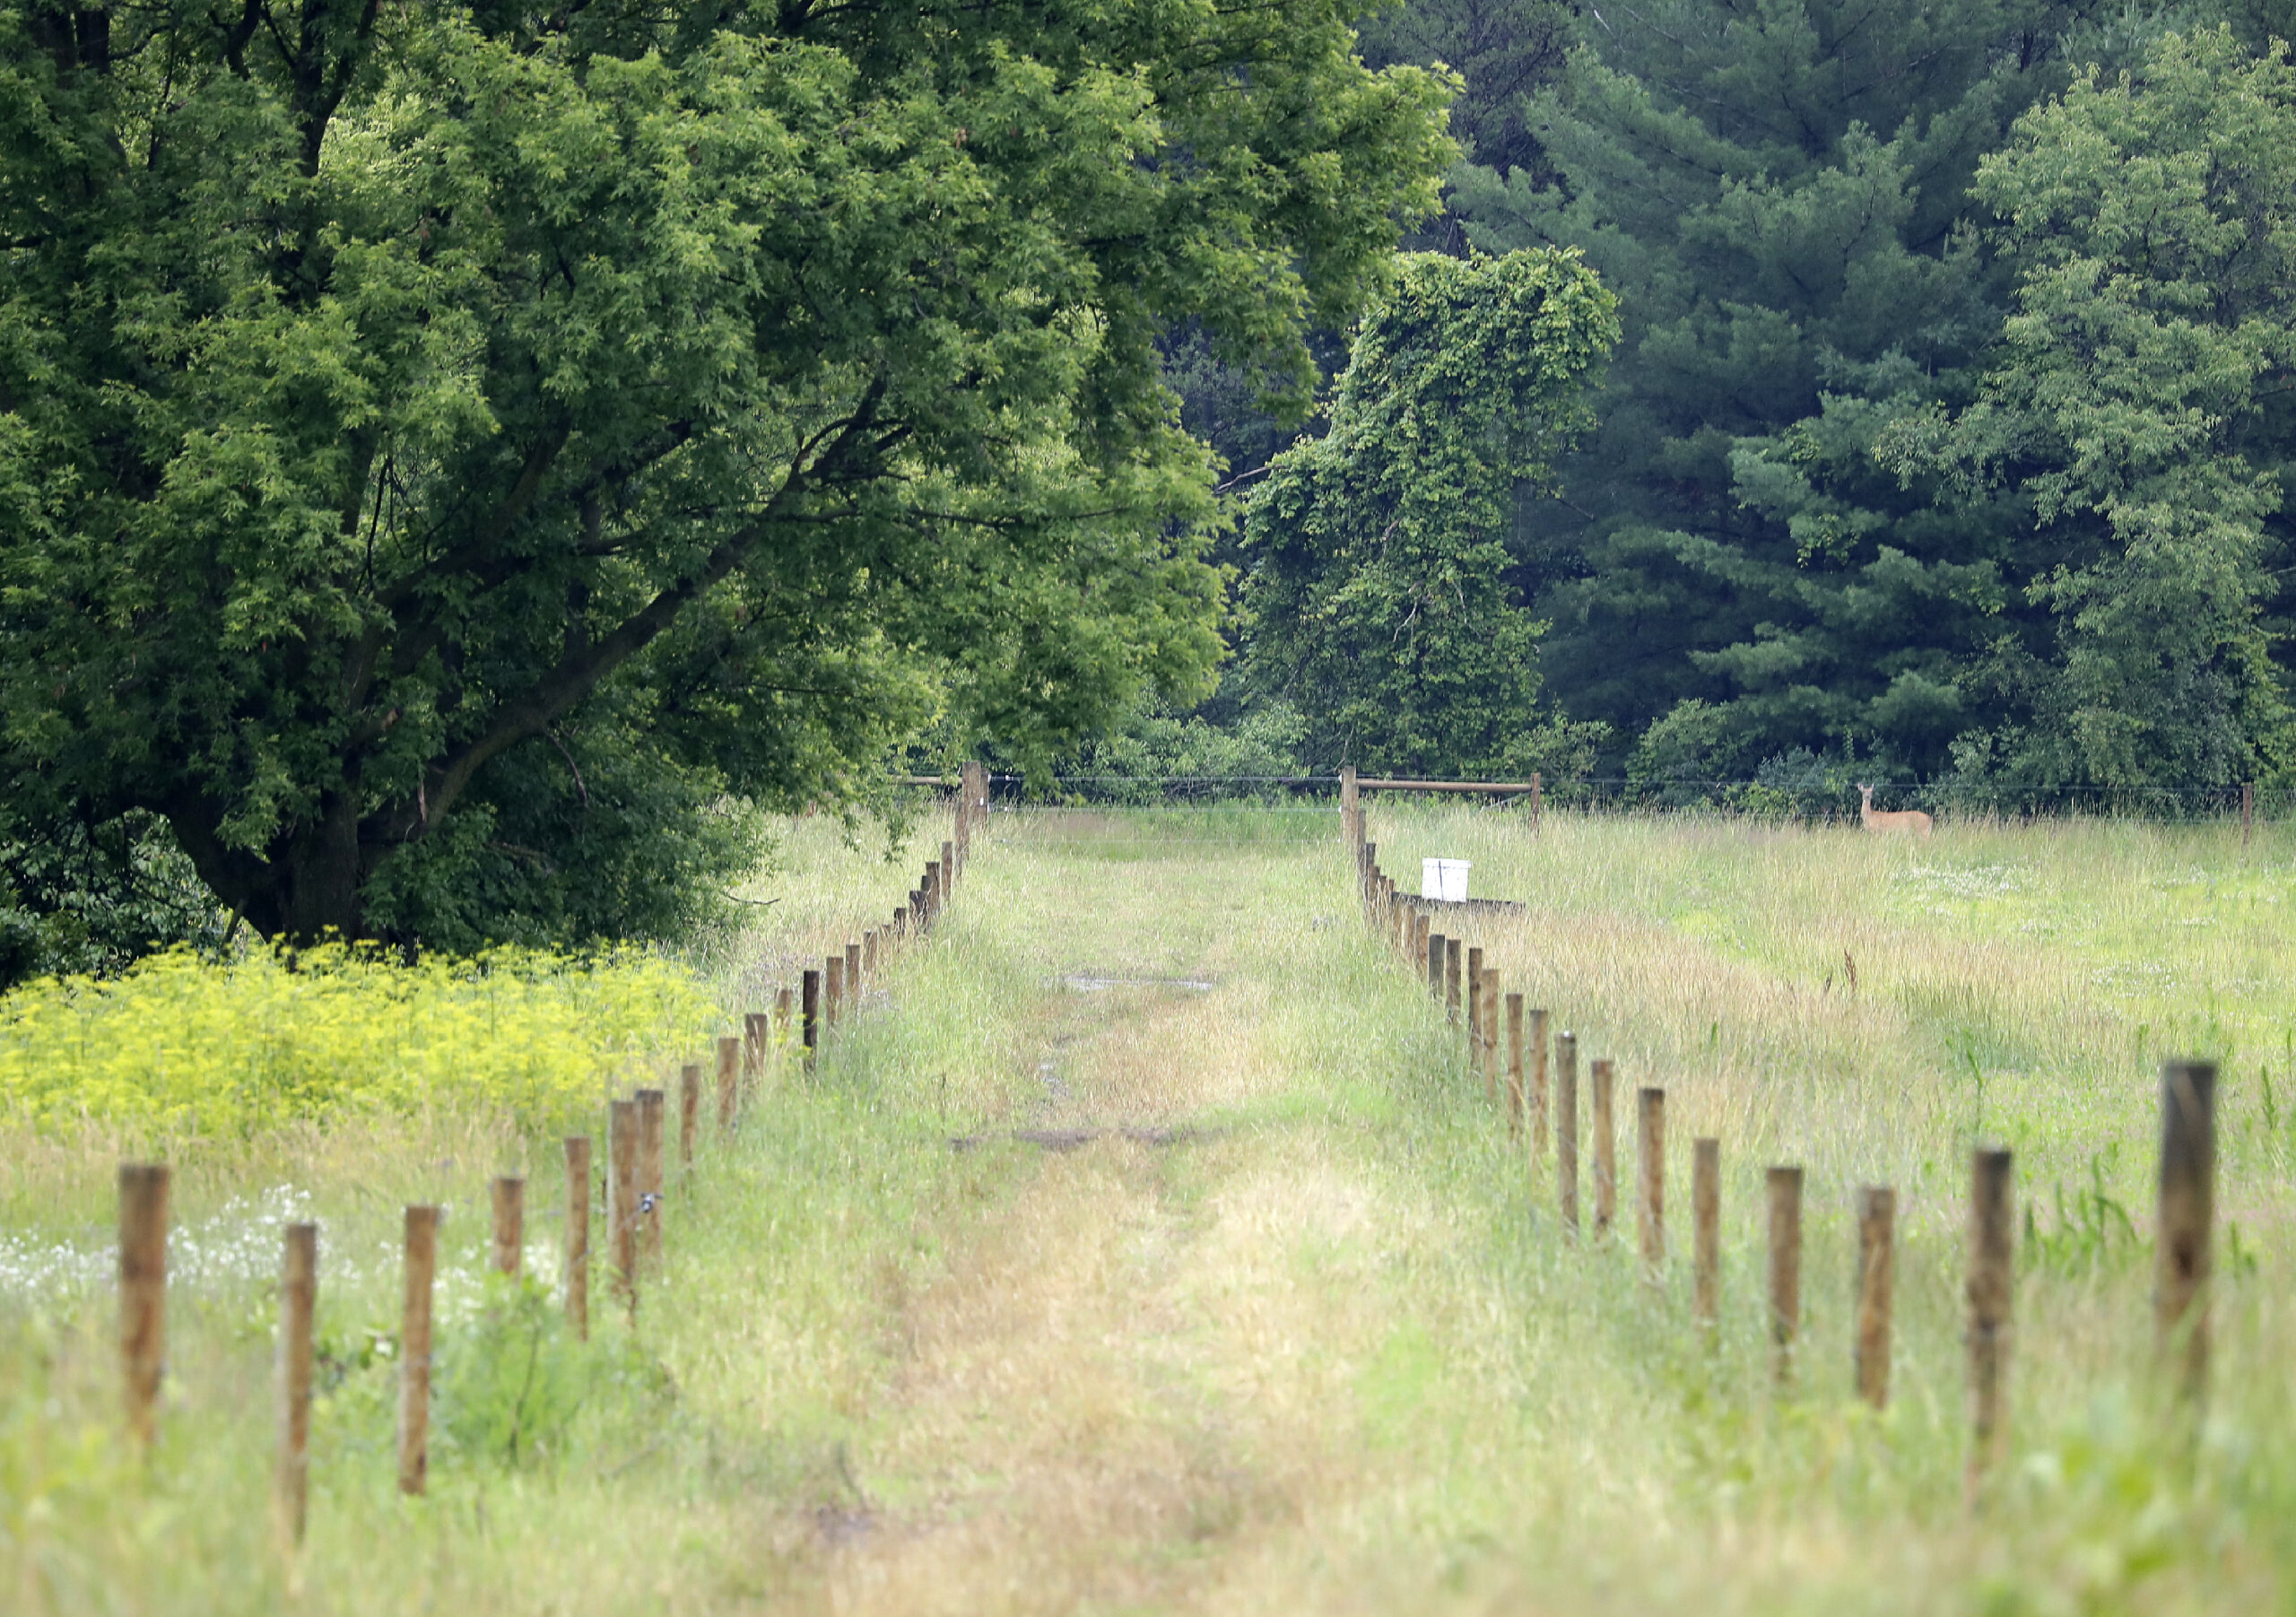 A lane created by a three-wire perimeter fence, left, and a single-wire interior fence on the Bouressa Family Farm in the Township of Royalton